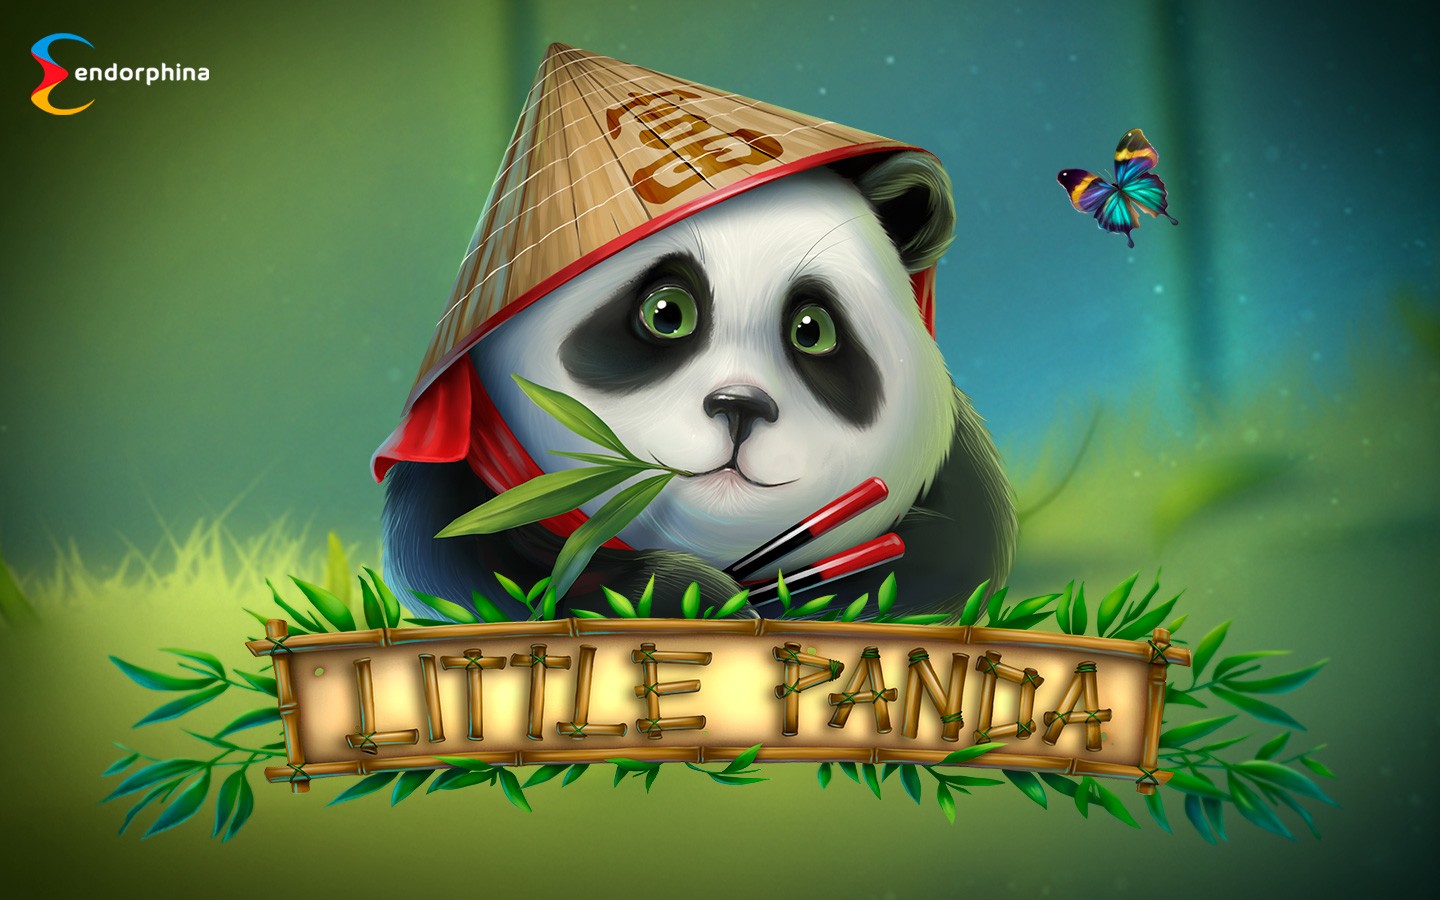 BEST CHINESE SLOTS OF 2021 | Play LITTLE PANDA SLOT now!